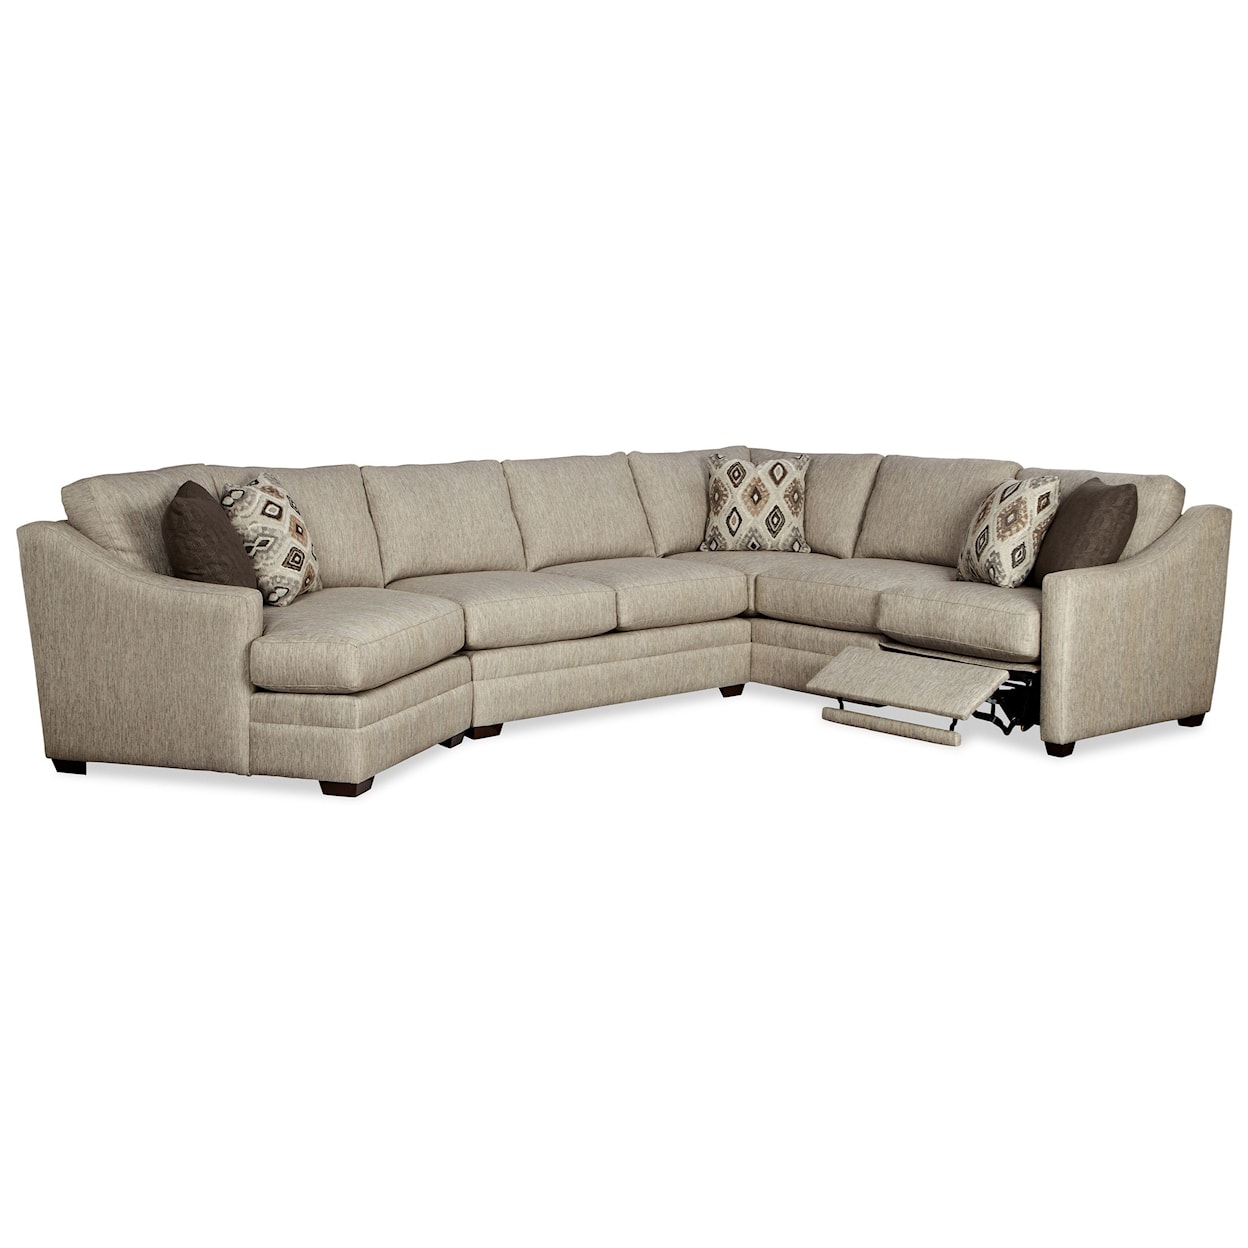 Craftmaster F9 Custom Collection 3 Pc Sectional Sofa w/ RAF Recliner